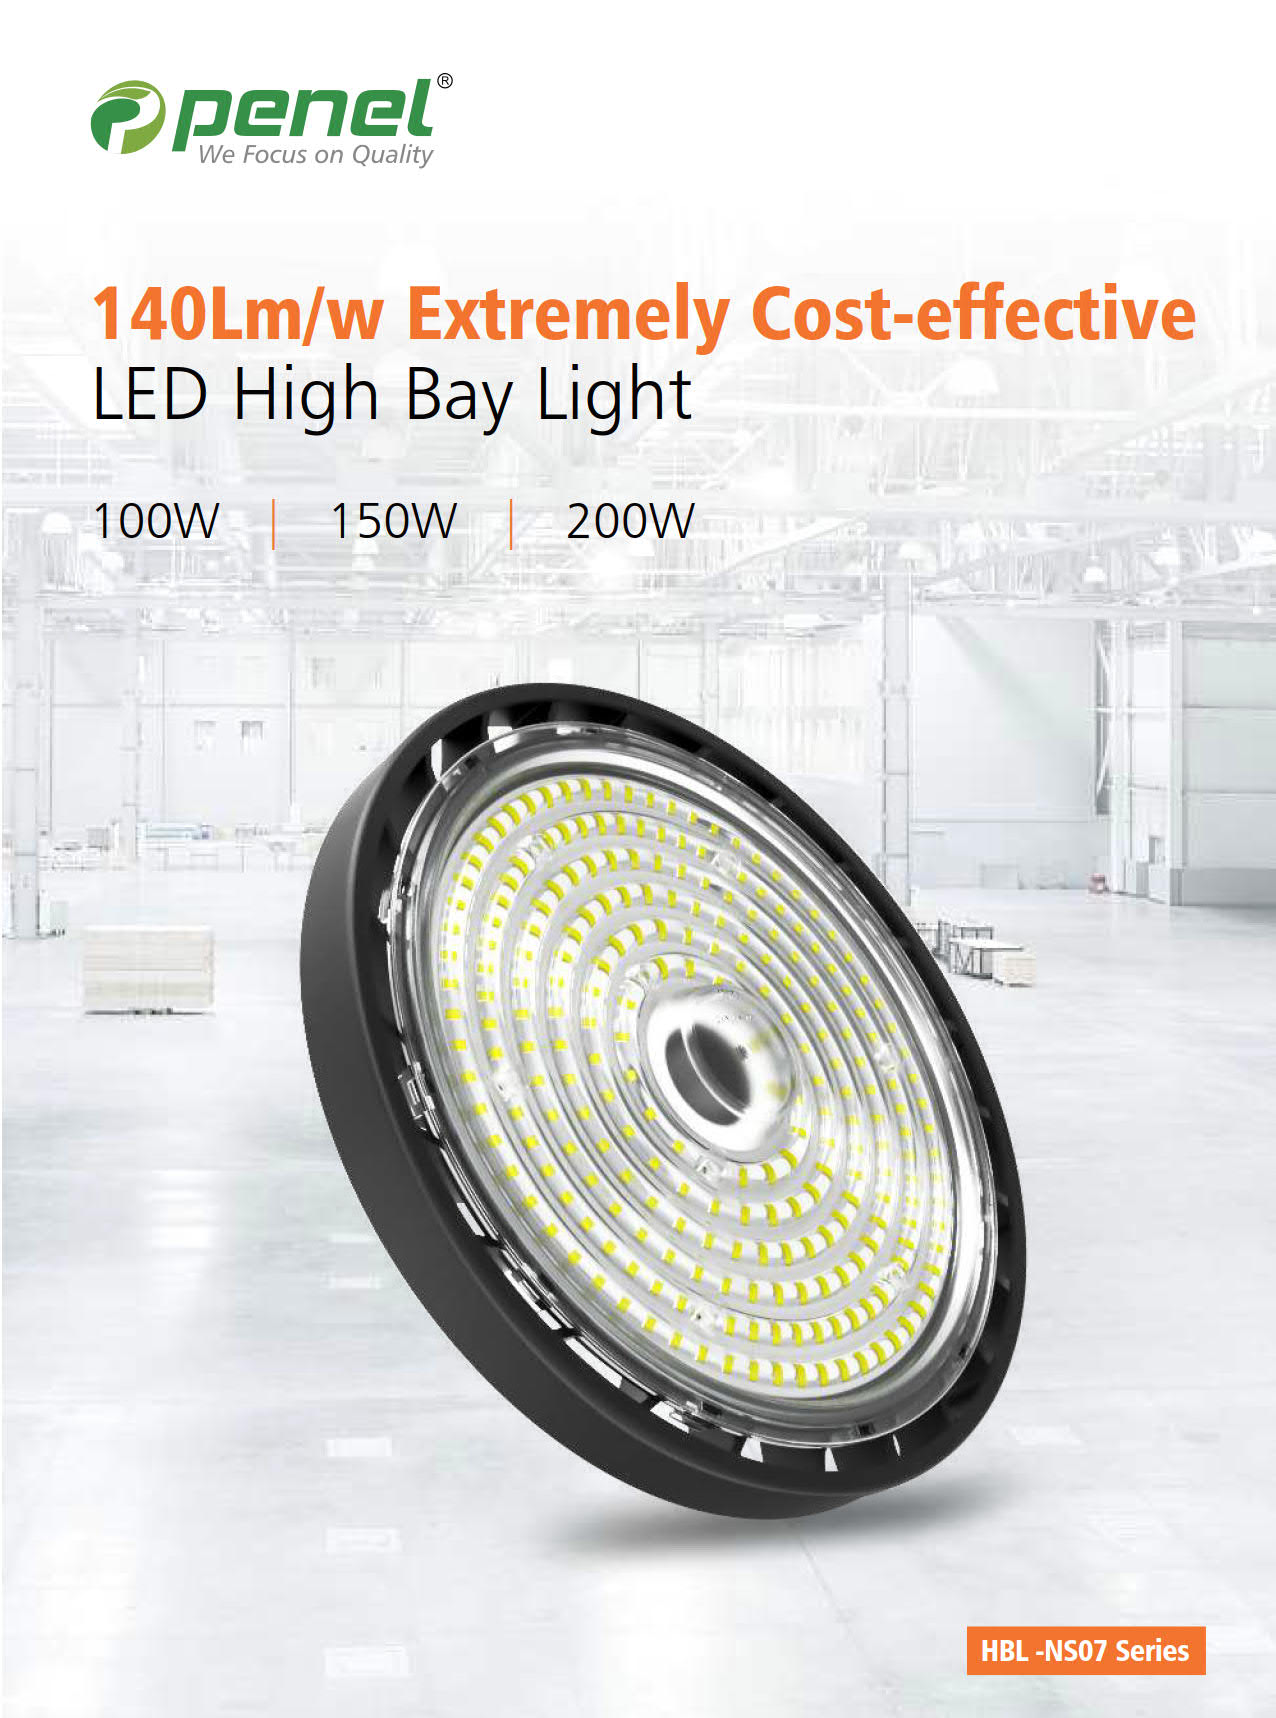 Datasheet of HBL-NS07 (140LMW Cost-effective LED High Bay Light from PENEL)